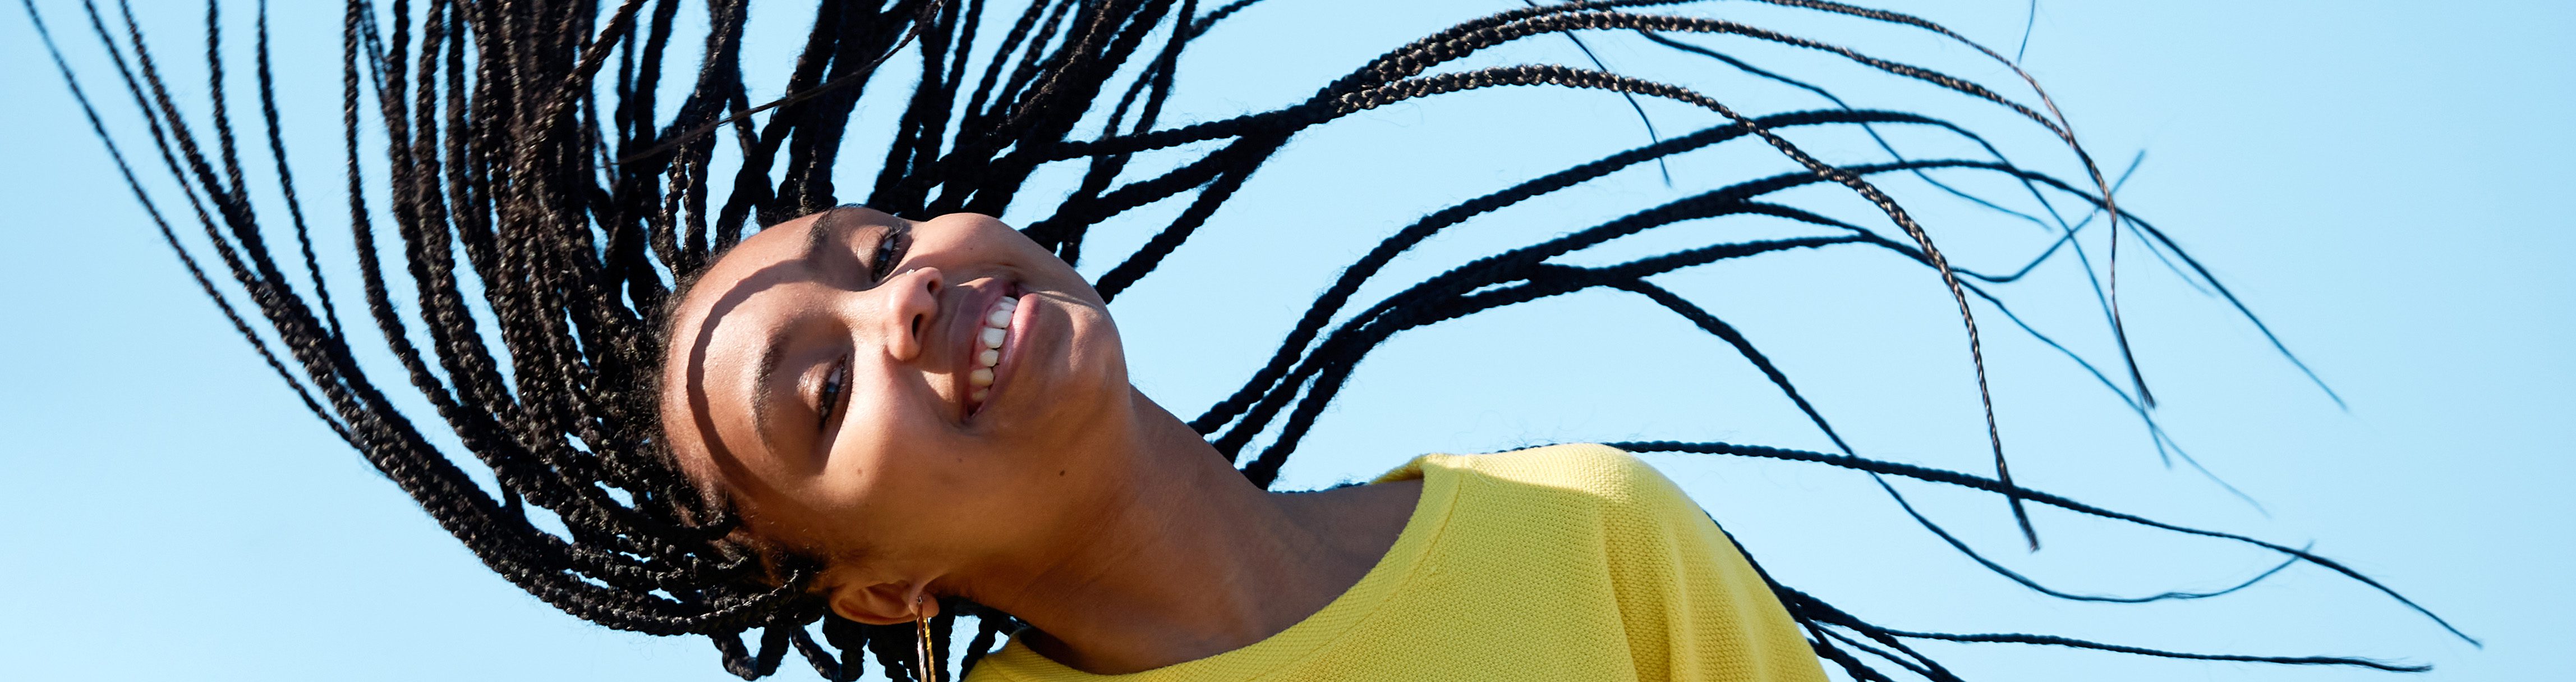 person smiling flipping braids into air